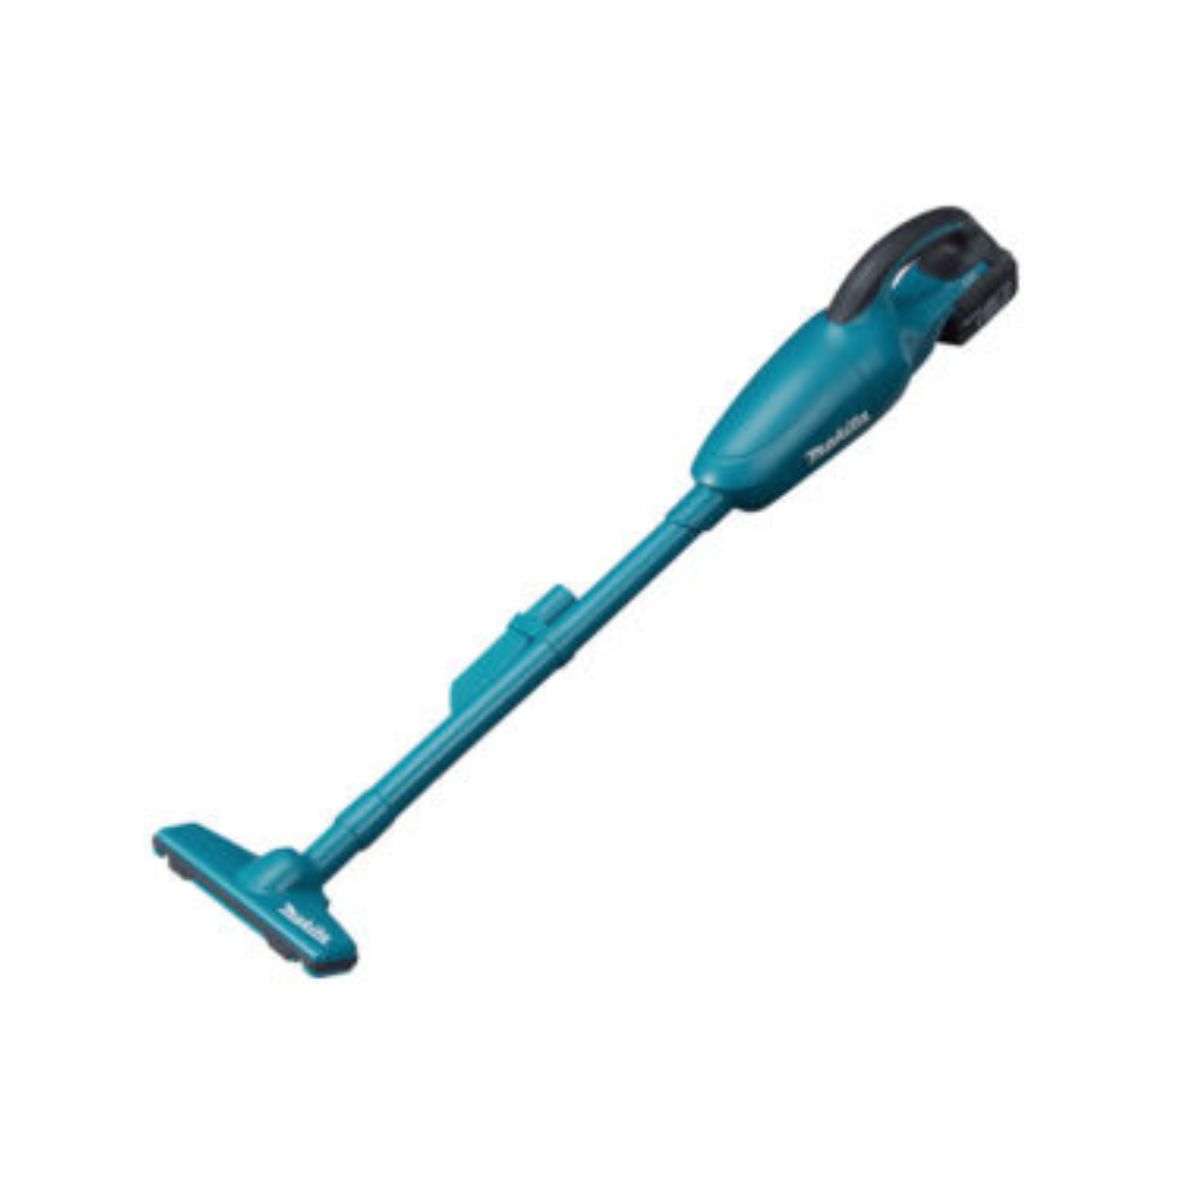 Makita 18V LXT Li-Ion Cordless Cleaner - DCL180FRFW